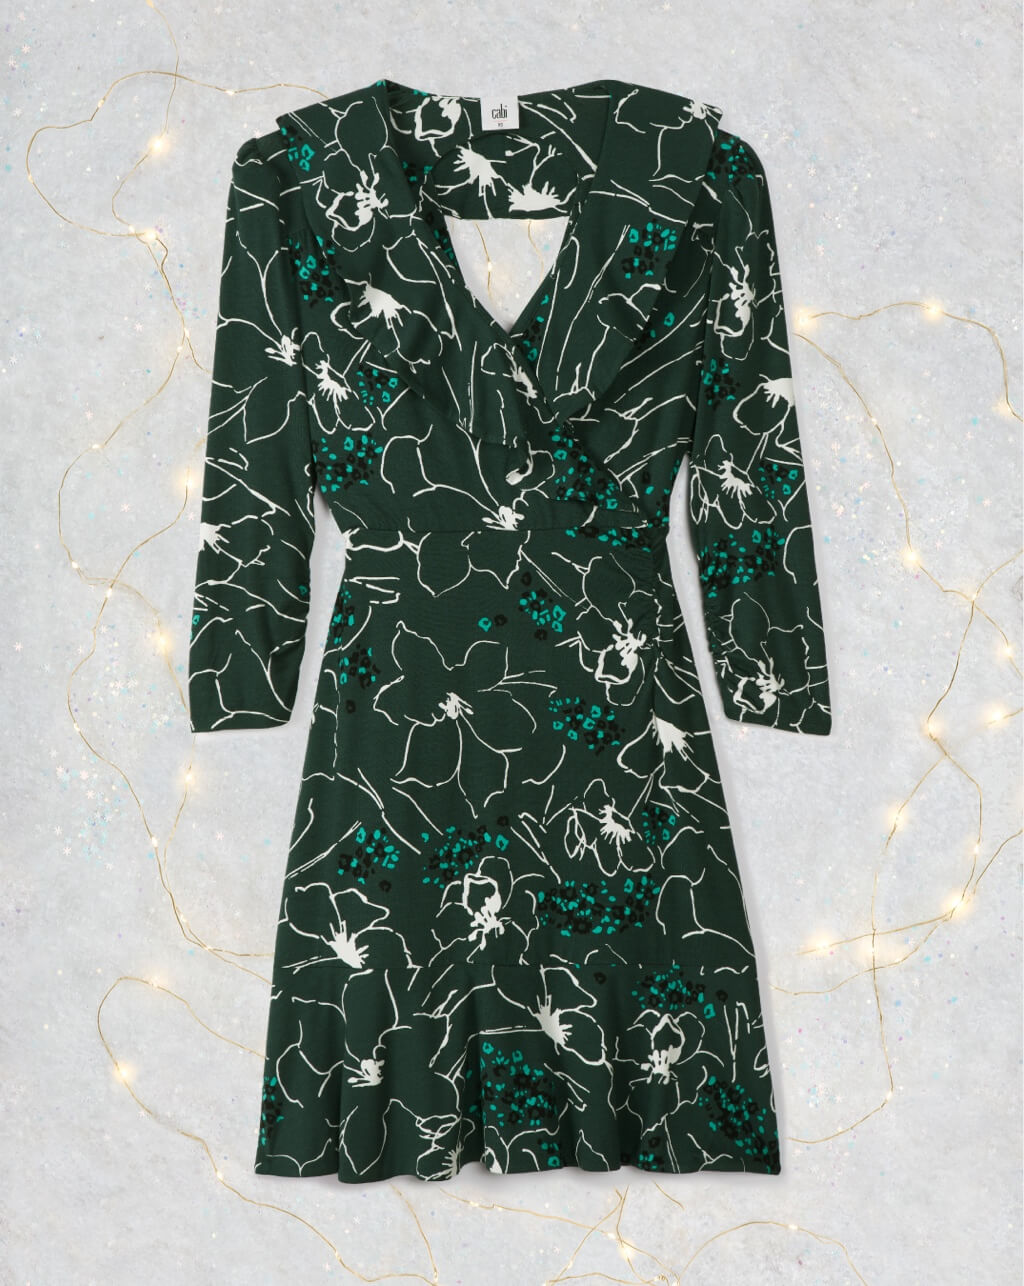 Ruffle Up Dress in Winter Floral with snowflakes and lights as accents.